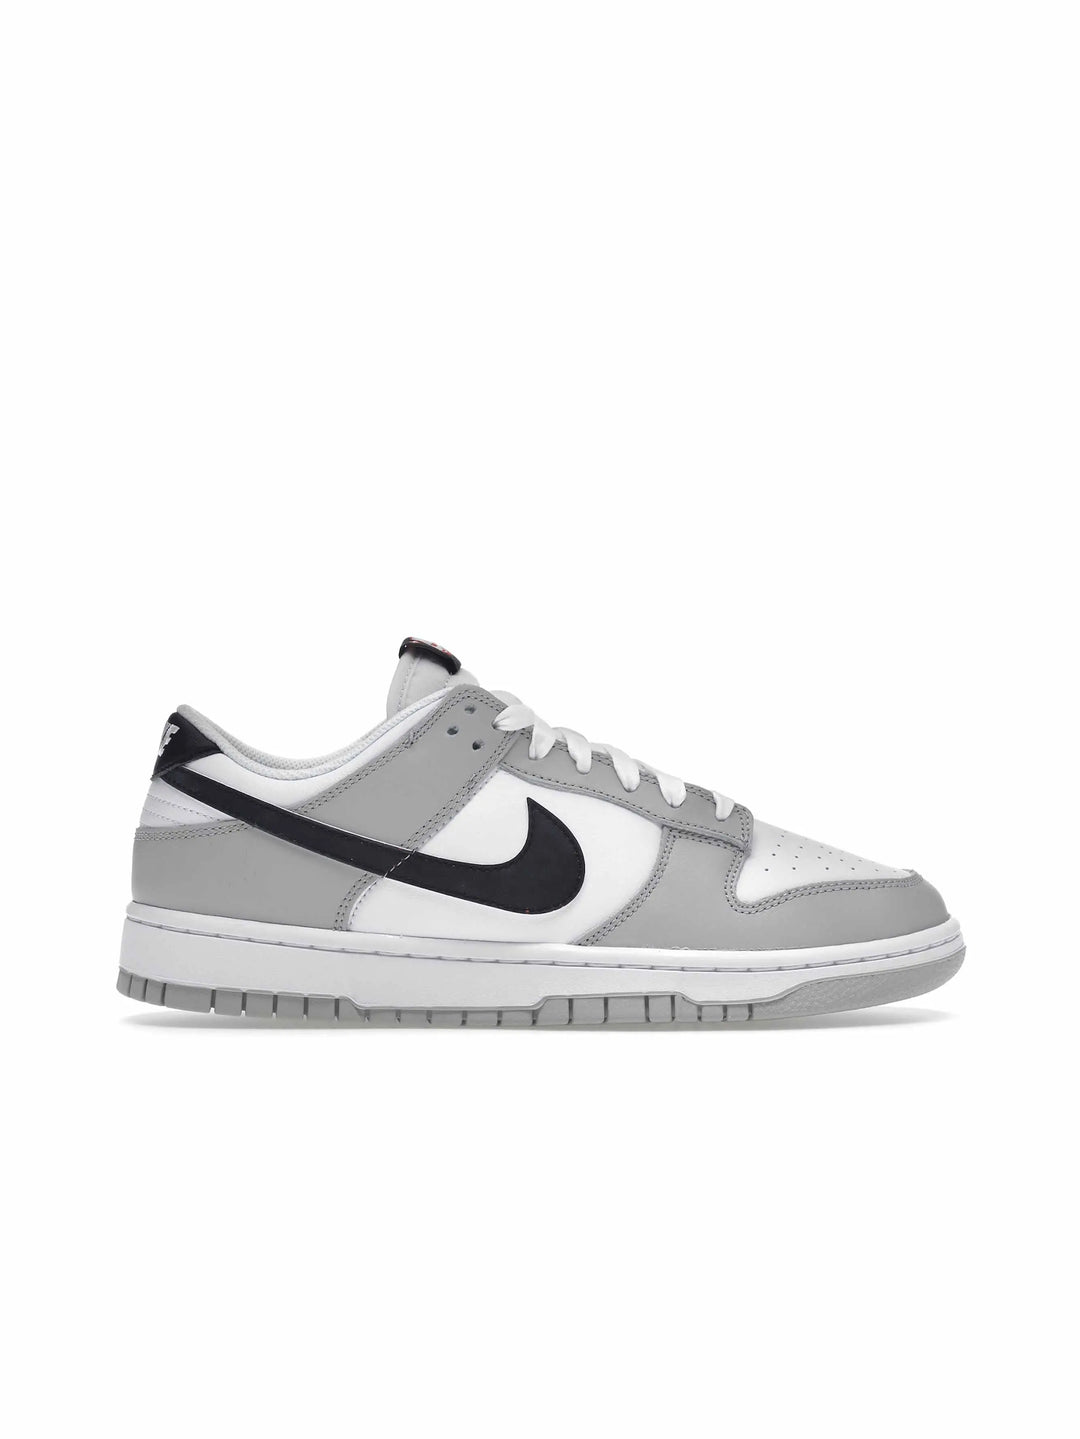 Nike Dunk Low SE Lottery Pack Grey Fog Prior